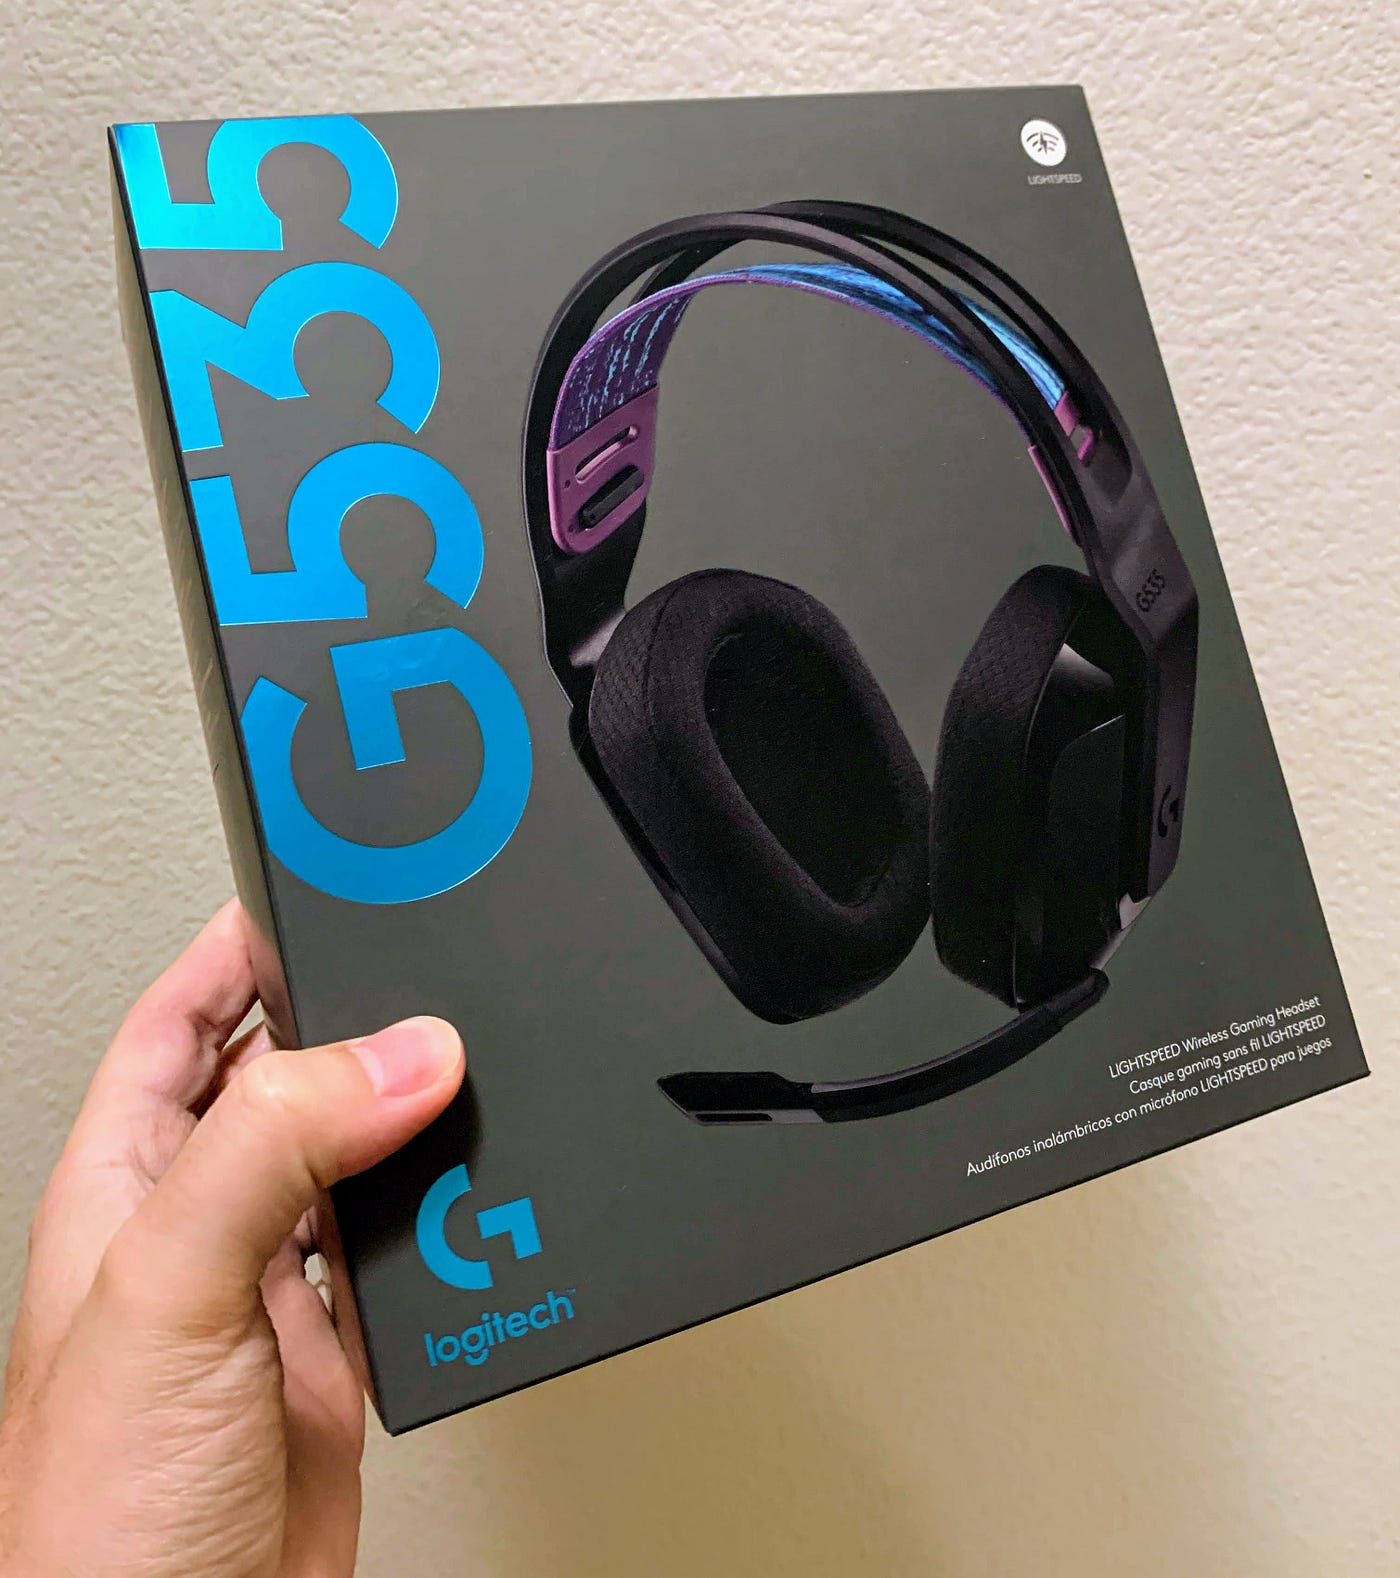 Logitech G435 Wireless Gaming Headset Review, by Alex Rowe